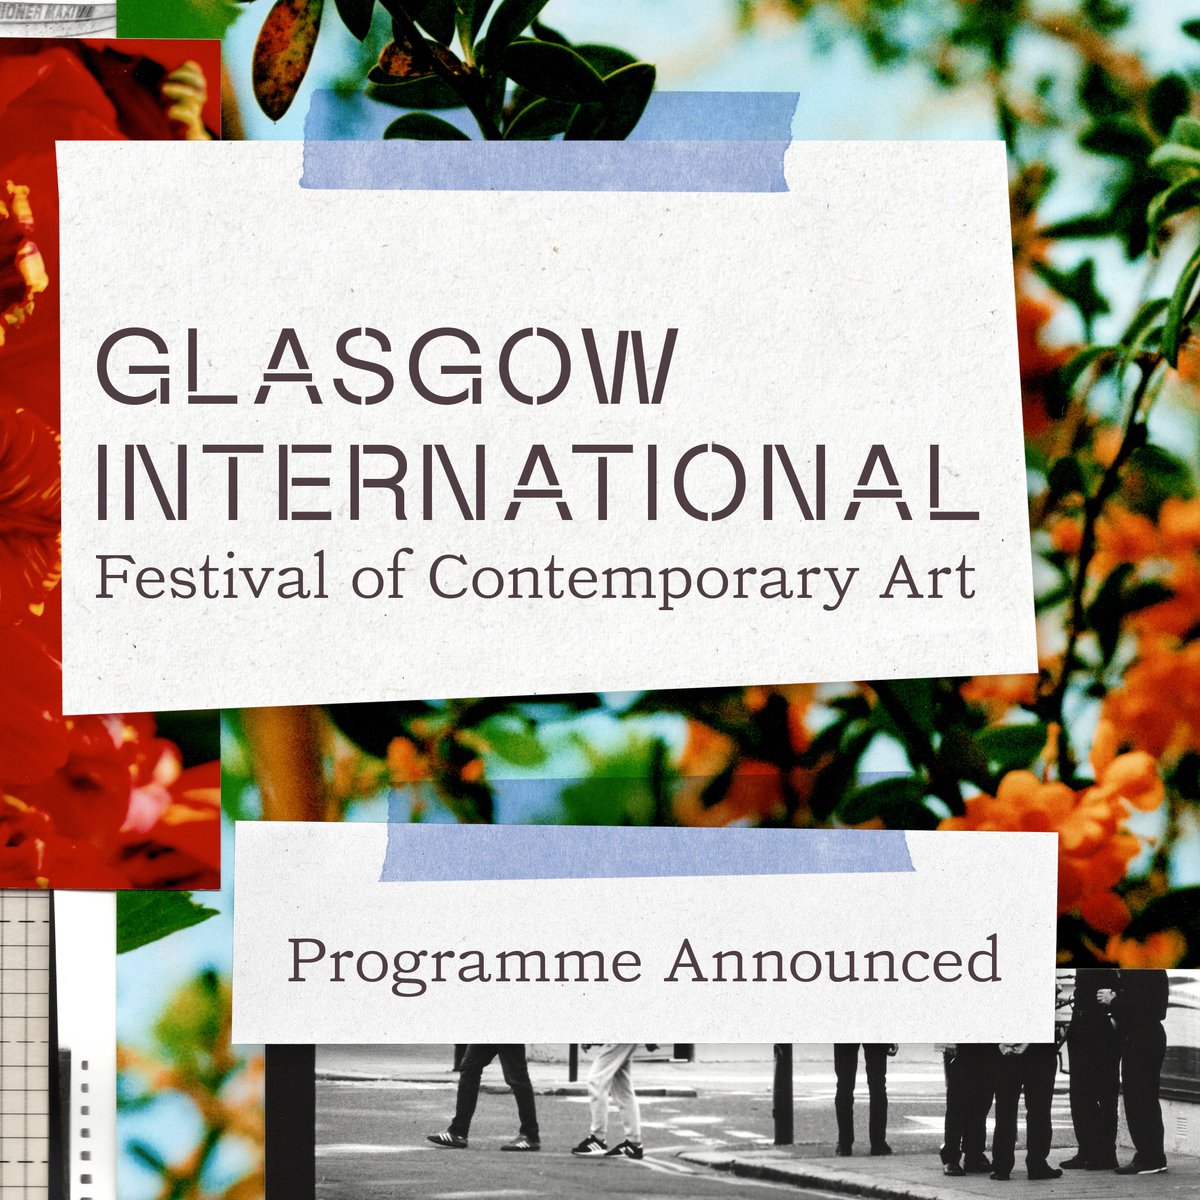 .@GIfestival, Scotland's biennial festival of contemporary art, has launched its full programme. Exhibitions, performances and gatherings featuring the work of Scottish, UK and international artists will take place across Glasgow from 7-23 June. More: glasgowinternational.org